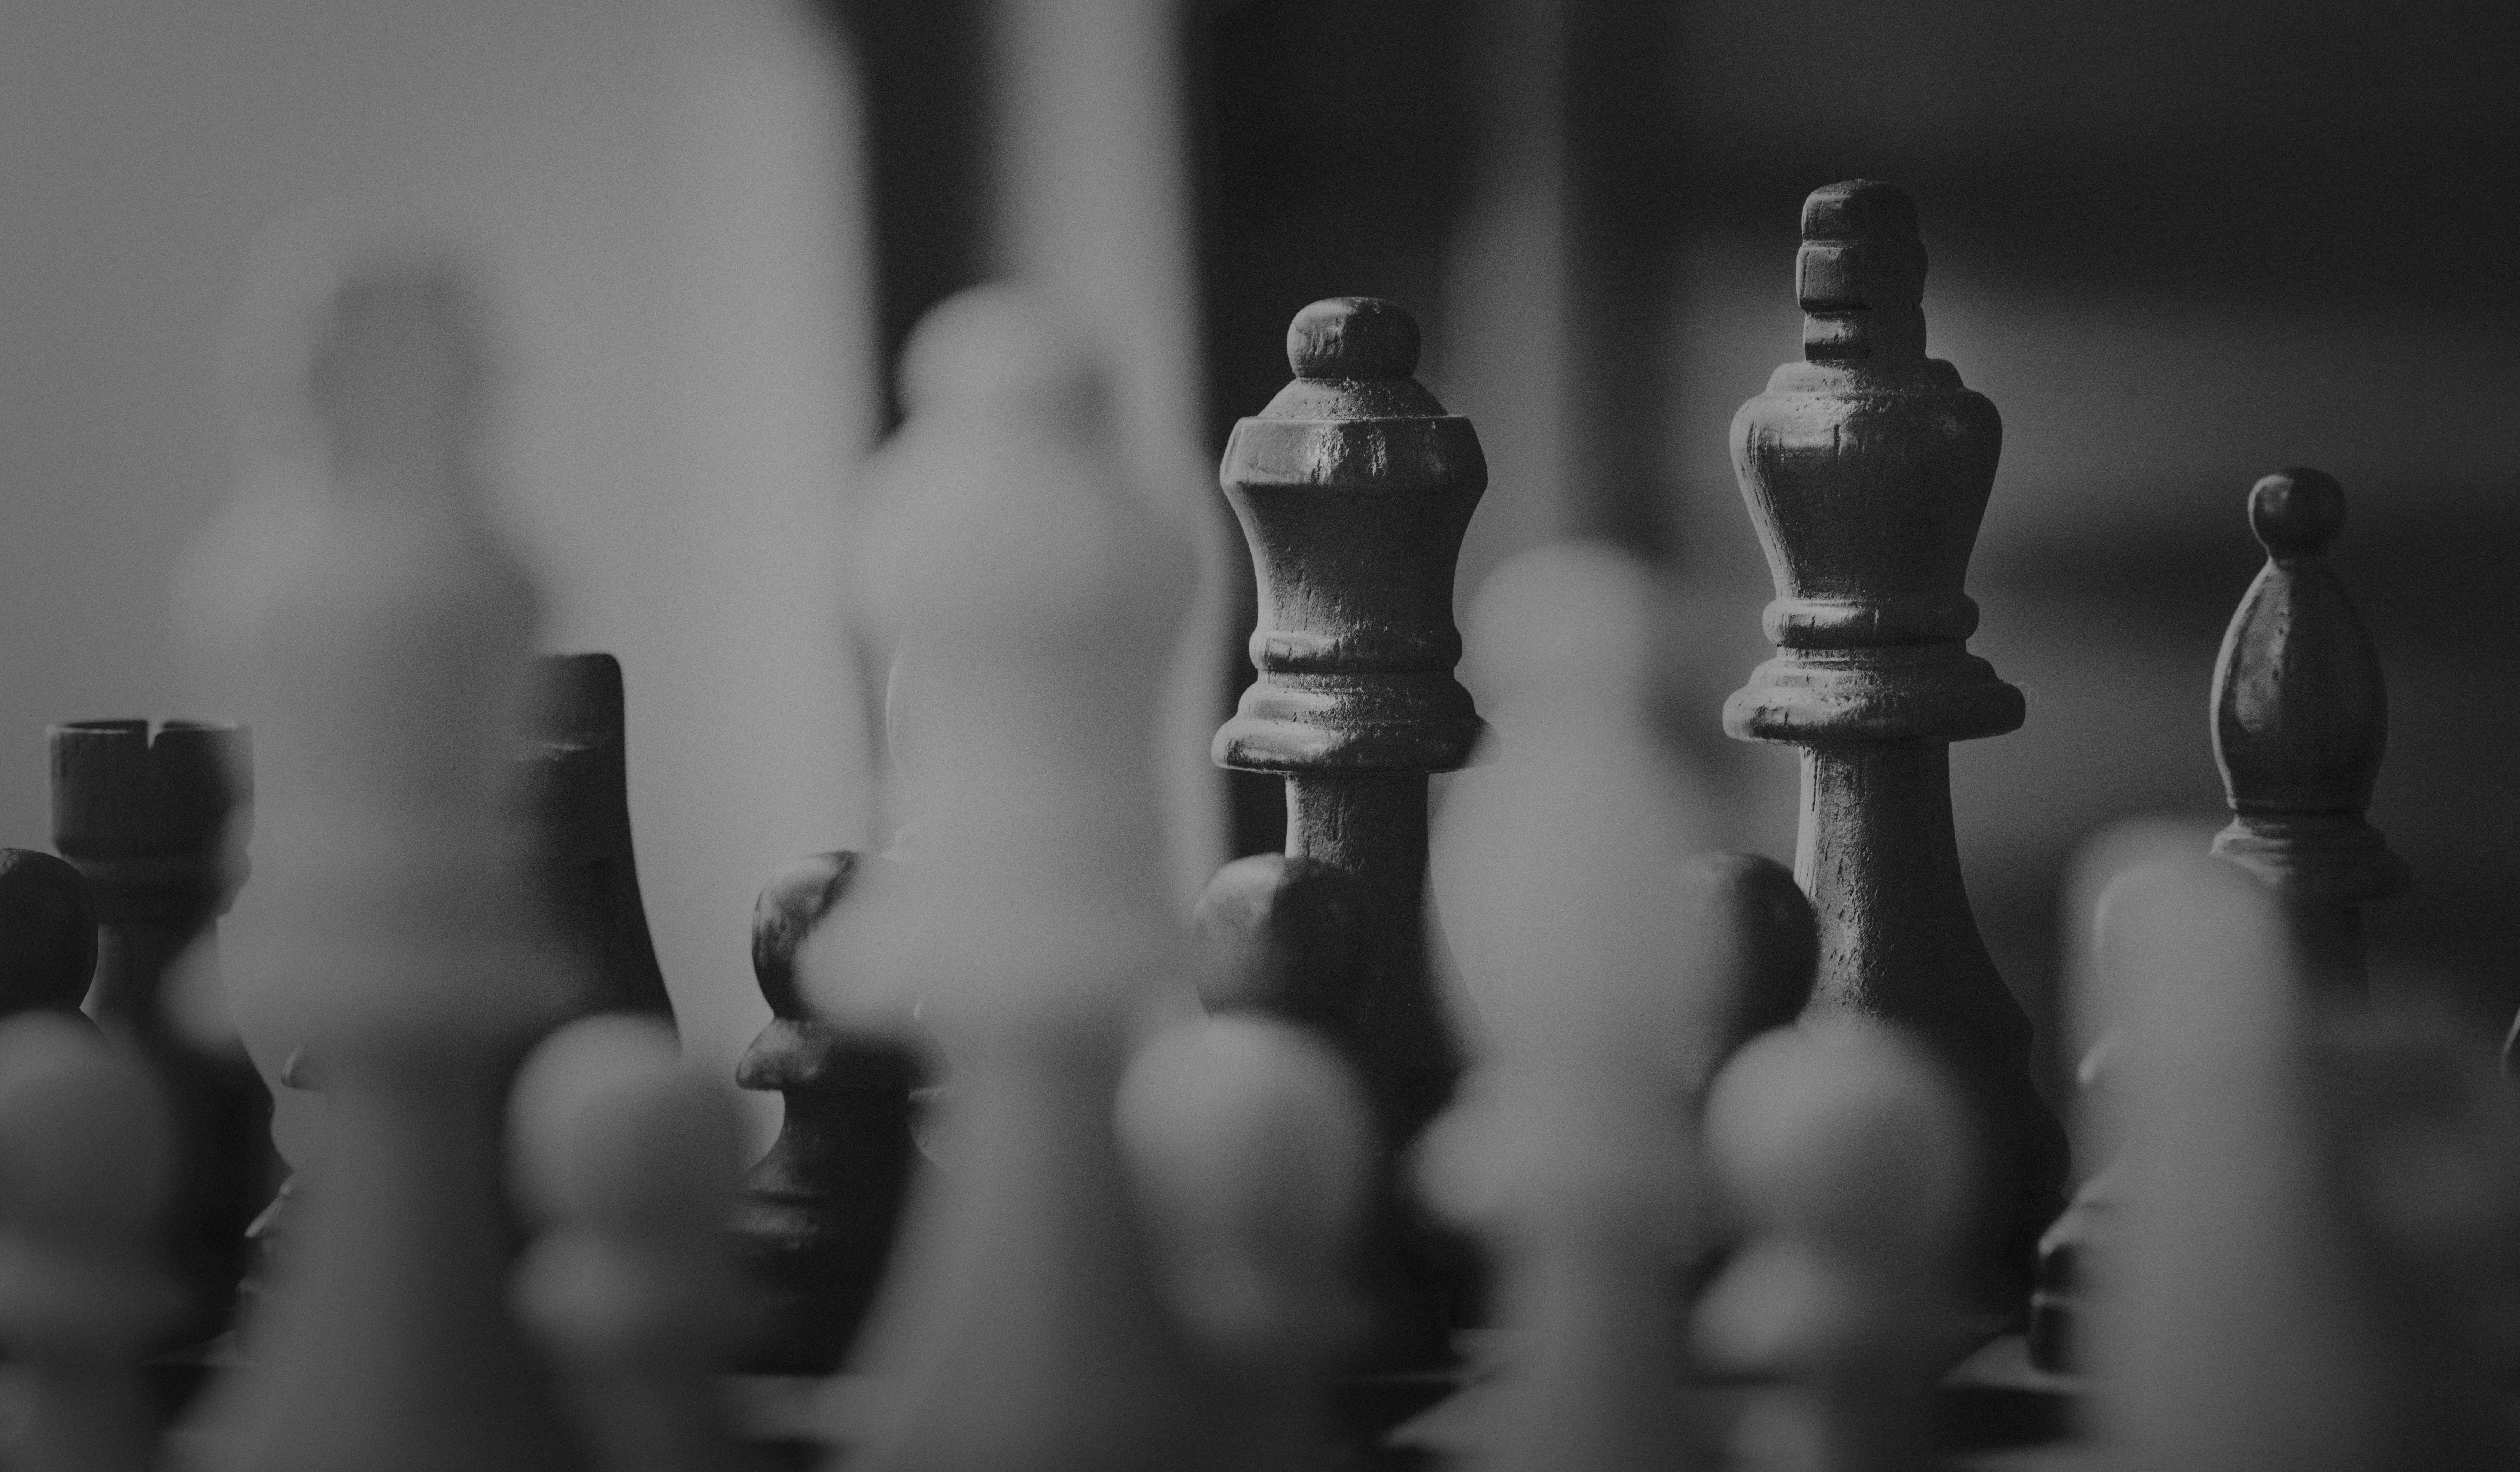 Chess 101: What Is Double Attack? Learn About the Different Types